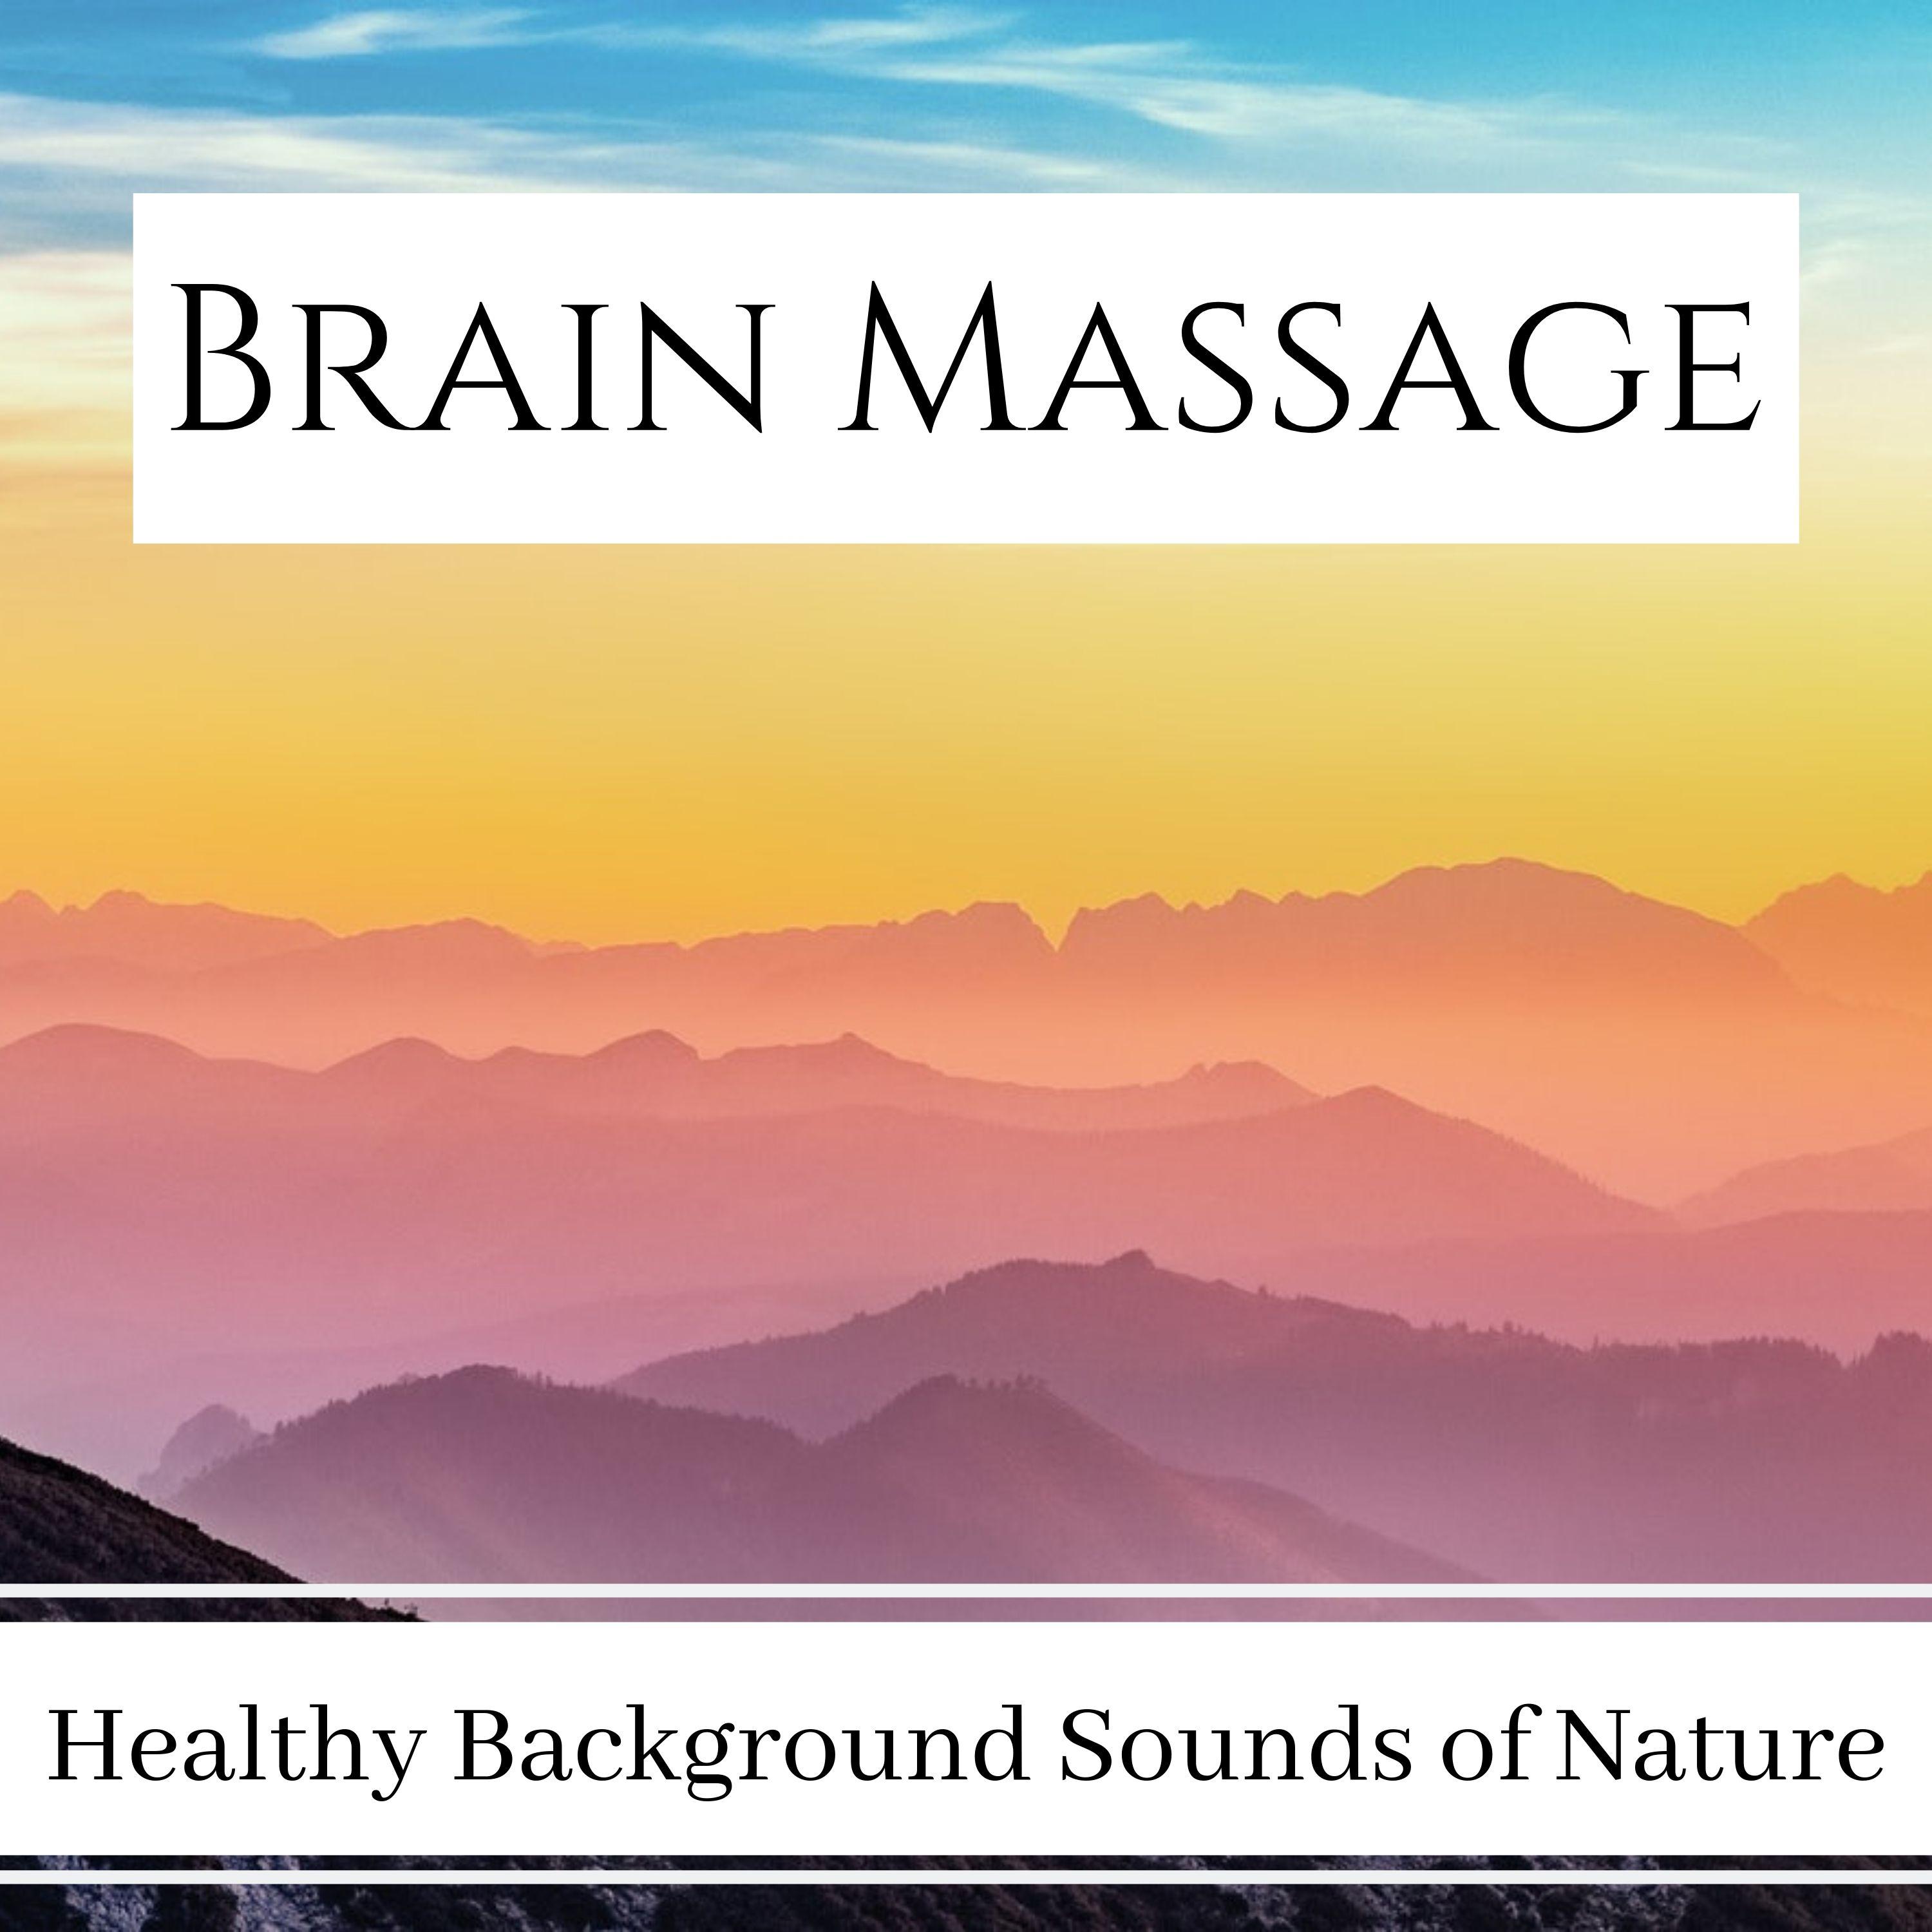 Brain Massage - Constant Tinnitus Removal, Healthy Background Sounds of Nature